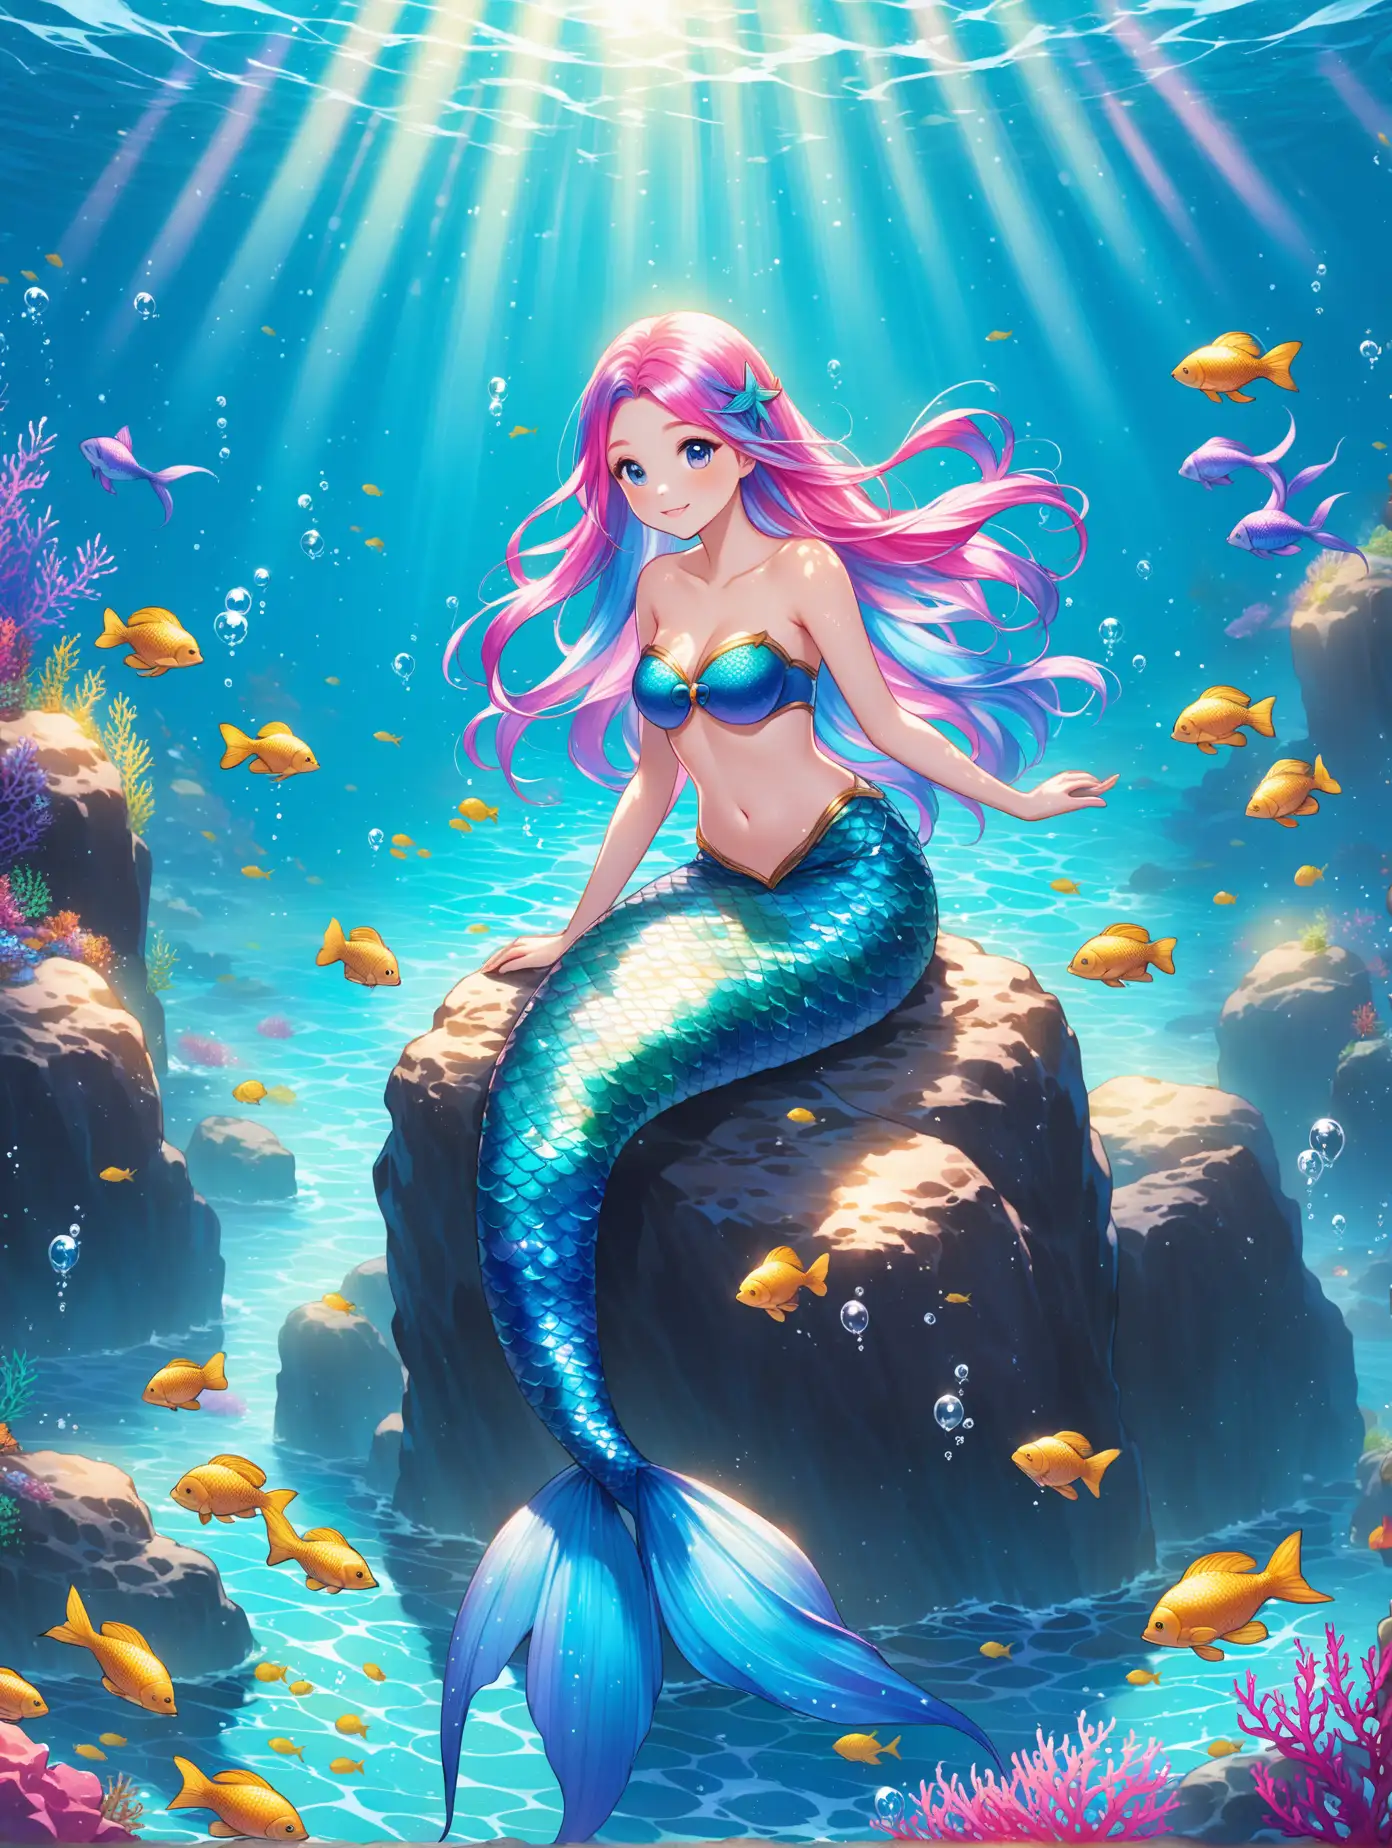 Shimmering Mermaid with Multicolored Hair Sitting on Rocks in the Sea